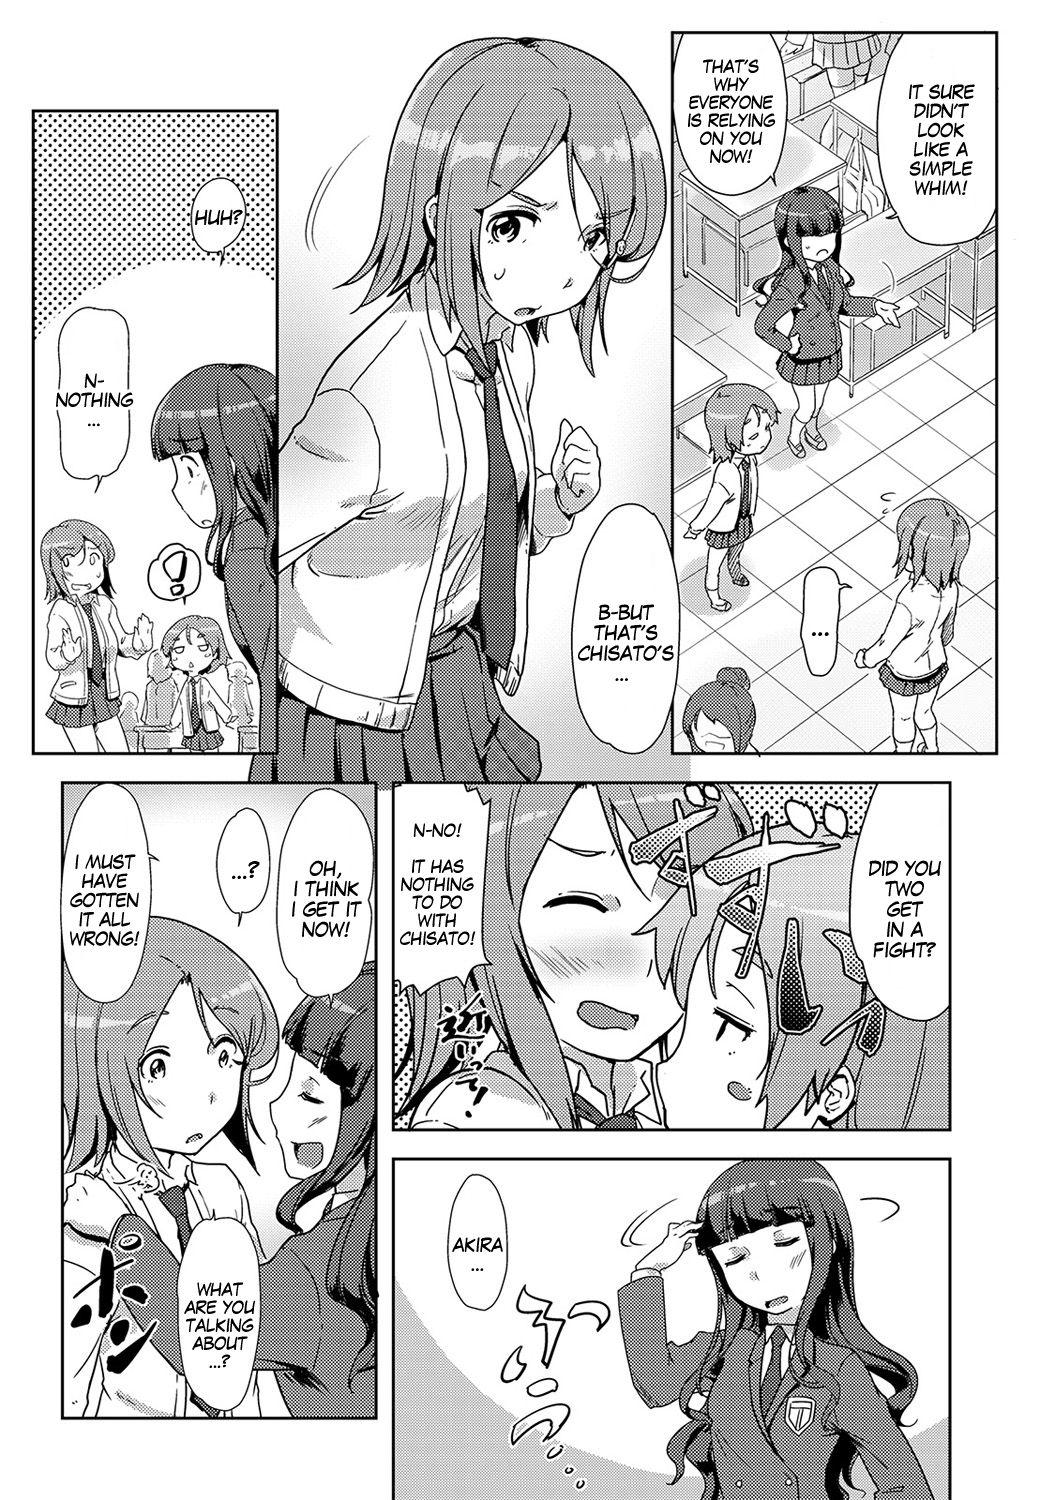 Shemale Porn Ecchi Shitara Irekawacchatta!? | We Switched Our Bodies After Having Sex!? Ch. 5 Masturbate - Page 6